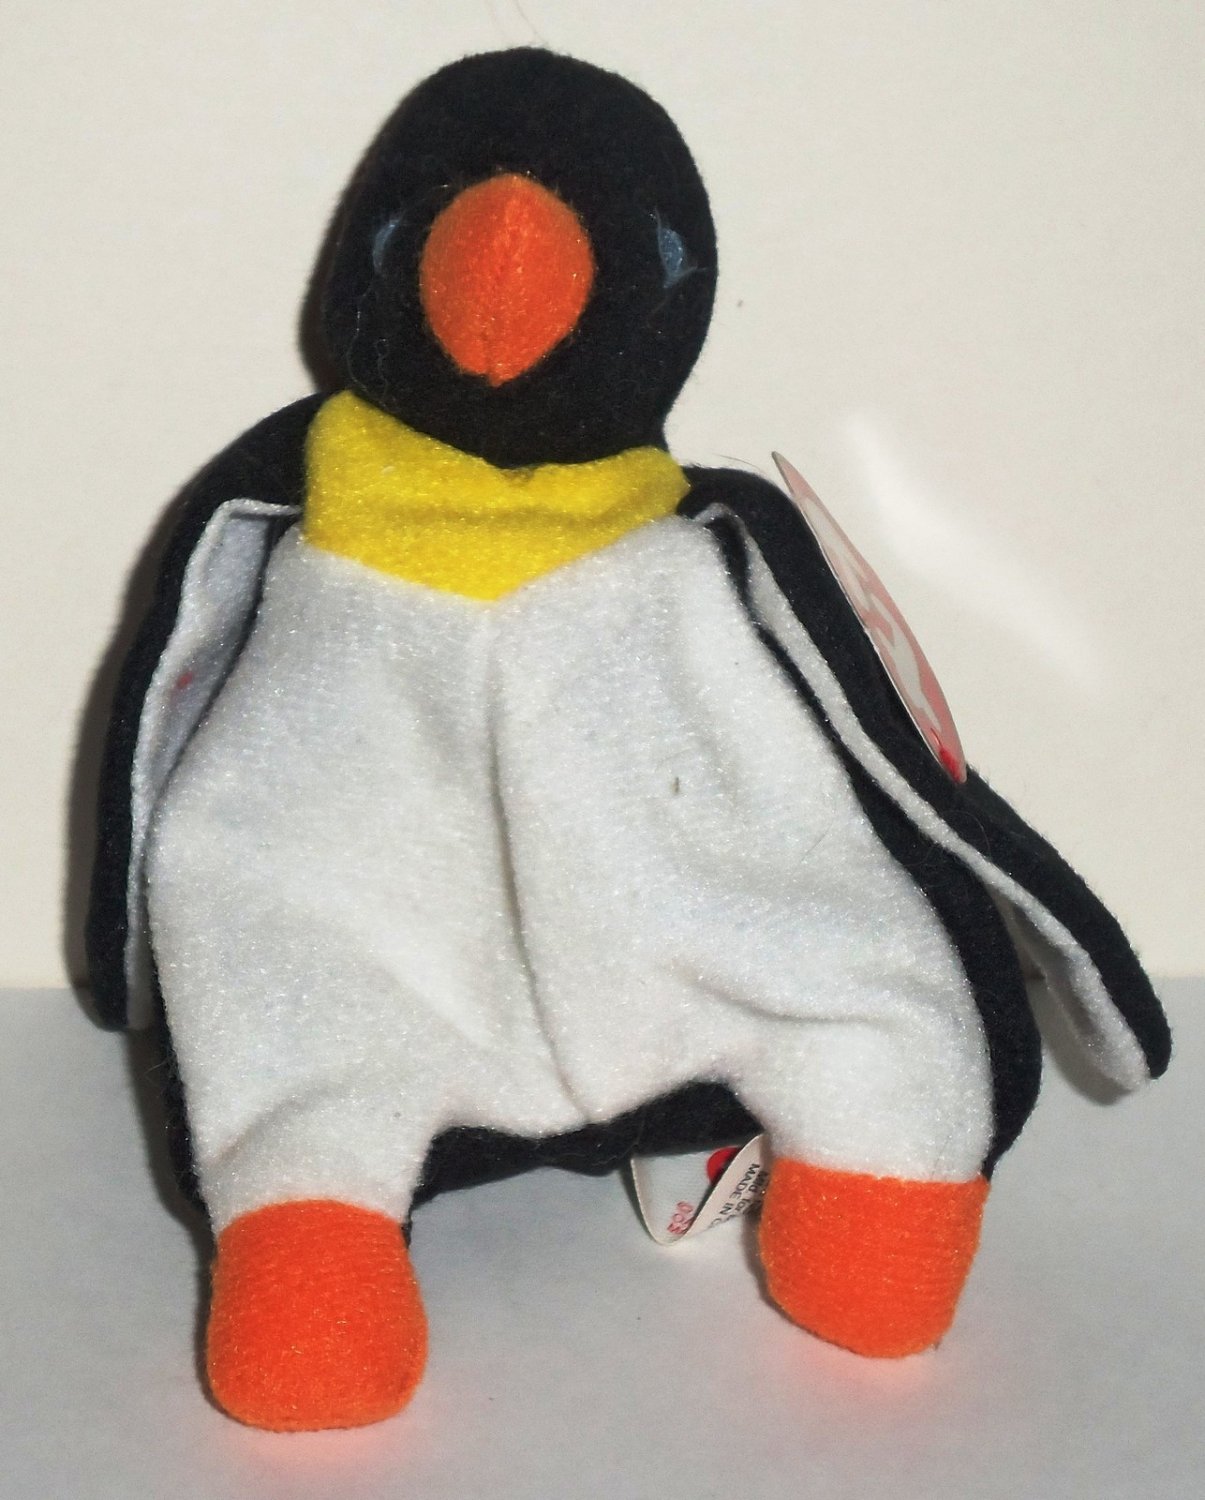 1998 Ty Teenie Beanie Baby McDonalds Happy Meal Plush Toy Waddle the Penguin #11 